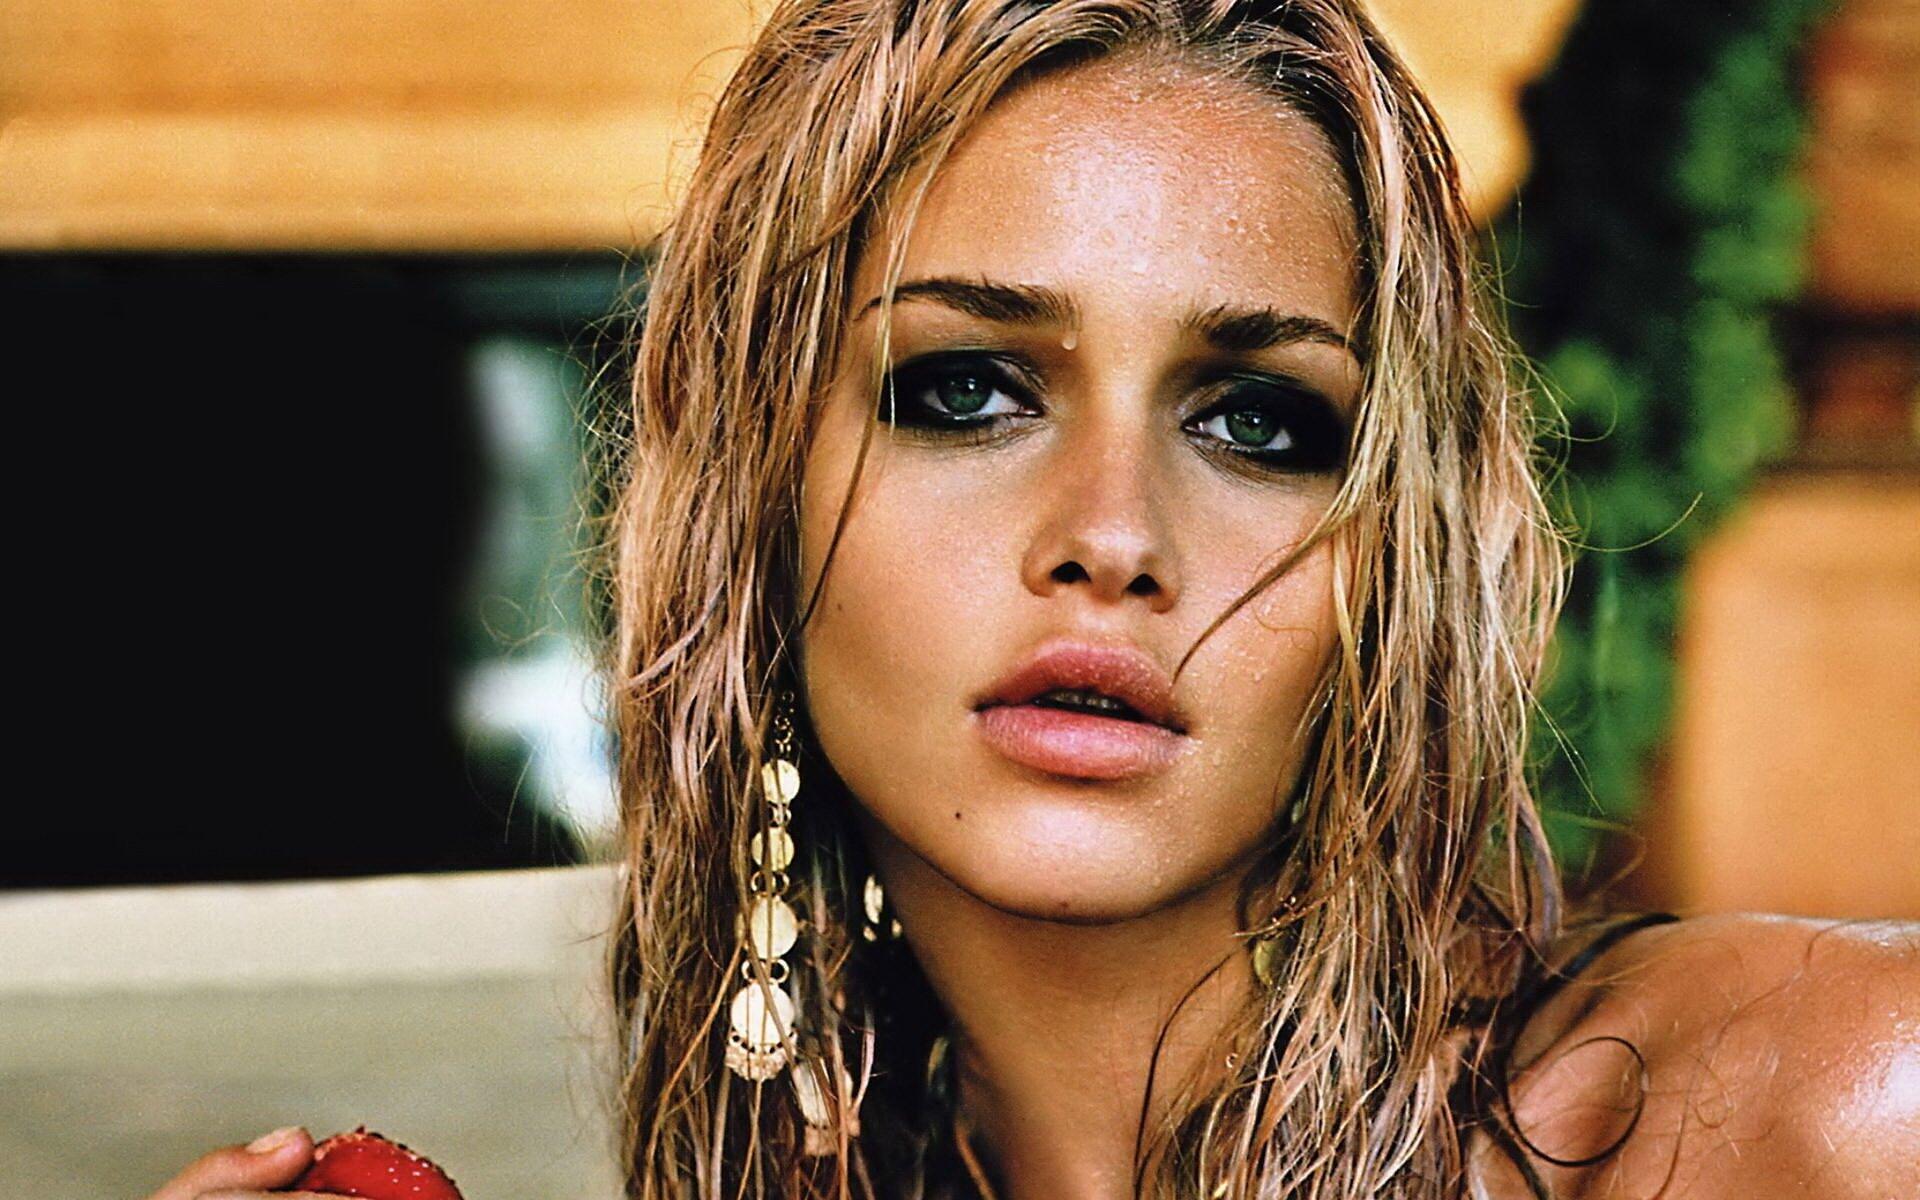 18 Unbelievable Facts About Ana Beatriz Barros - Facts.net